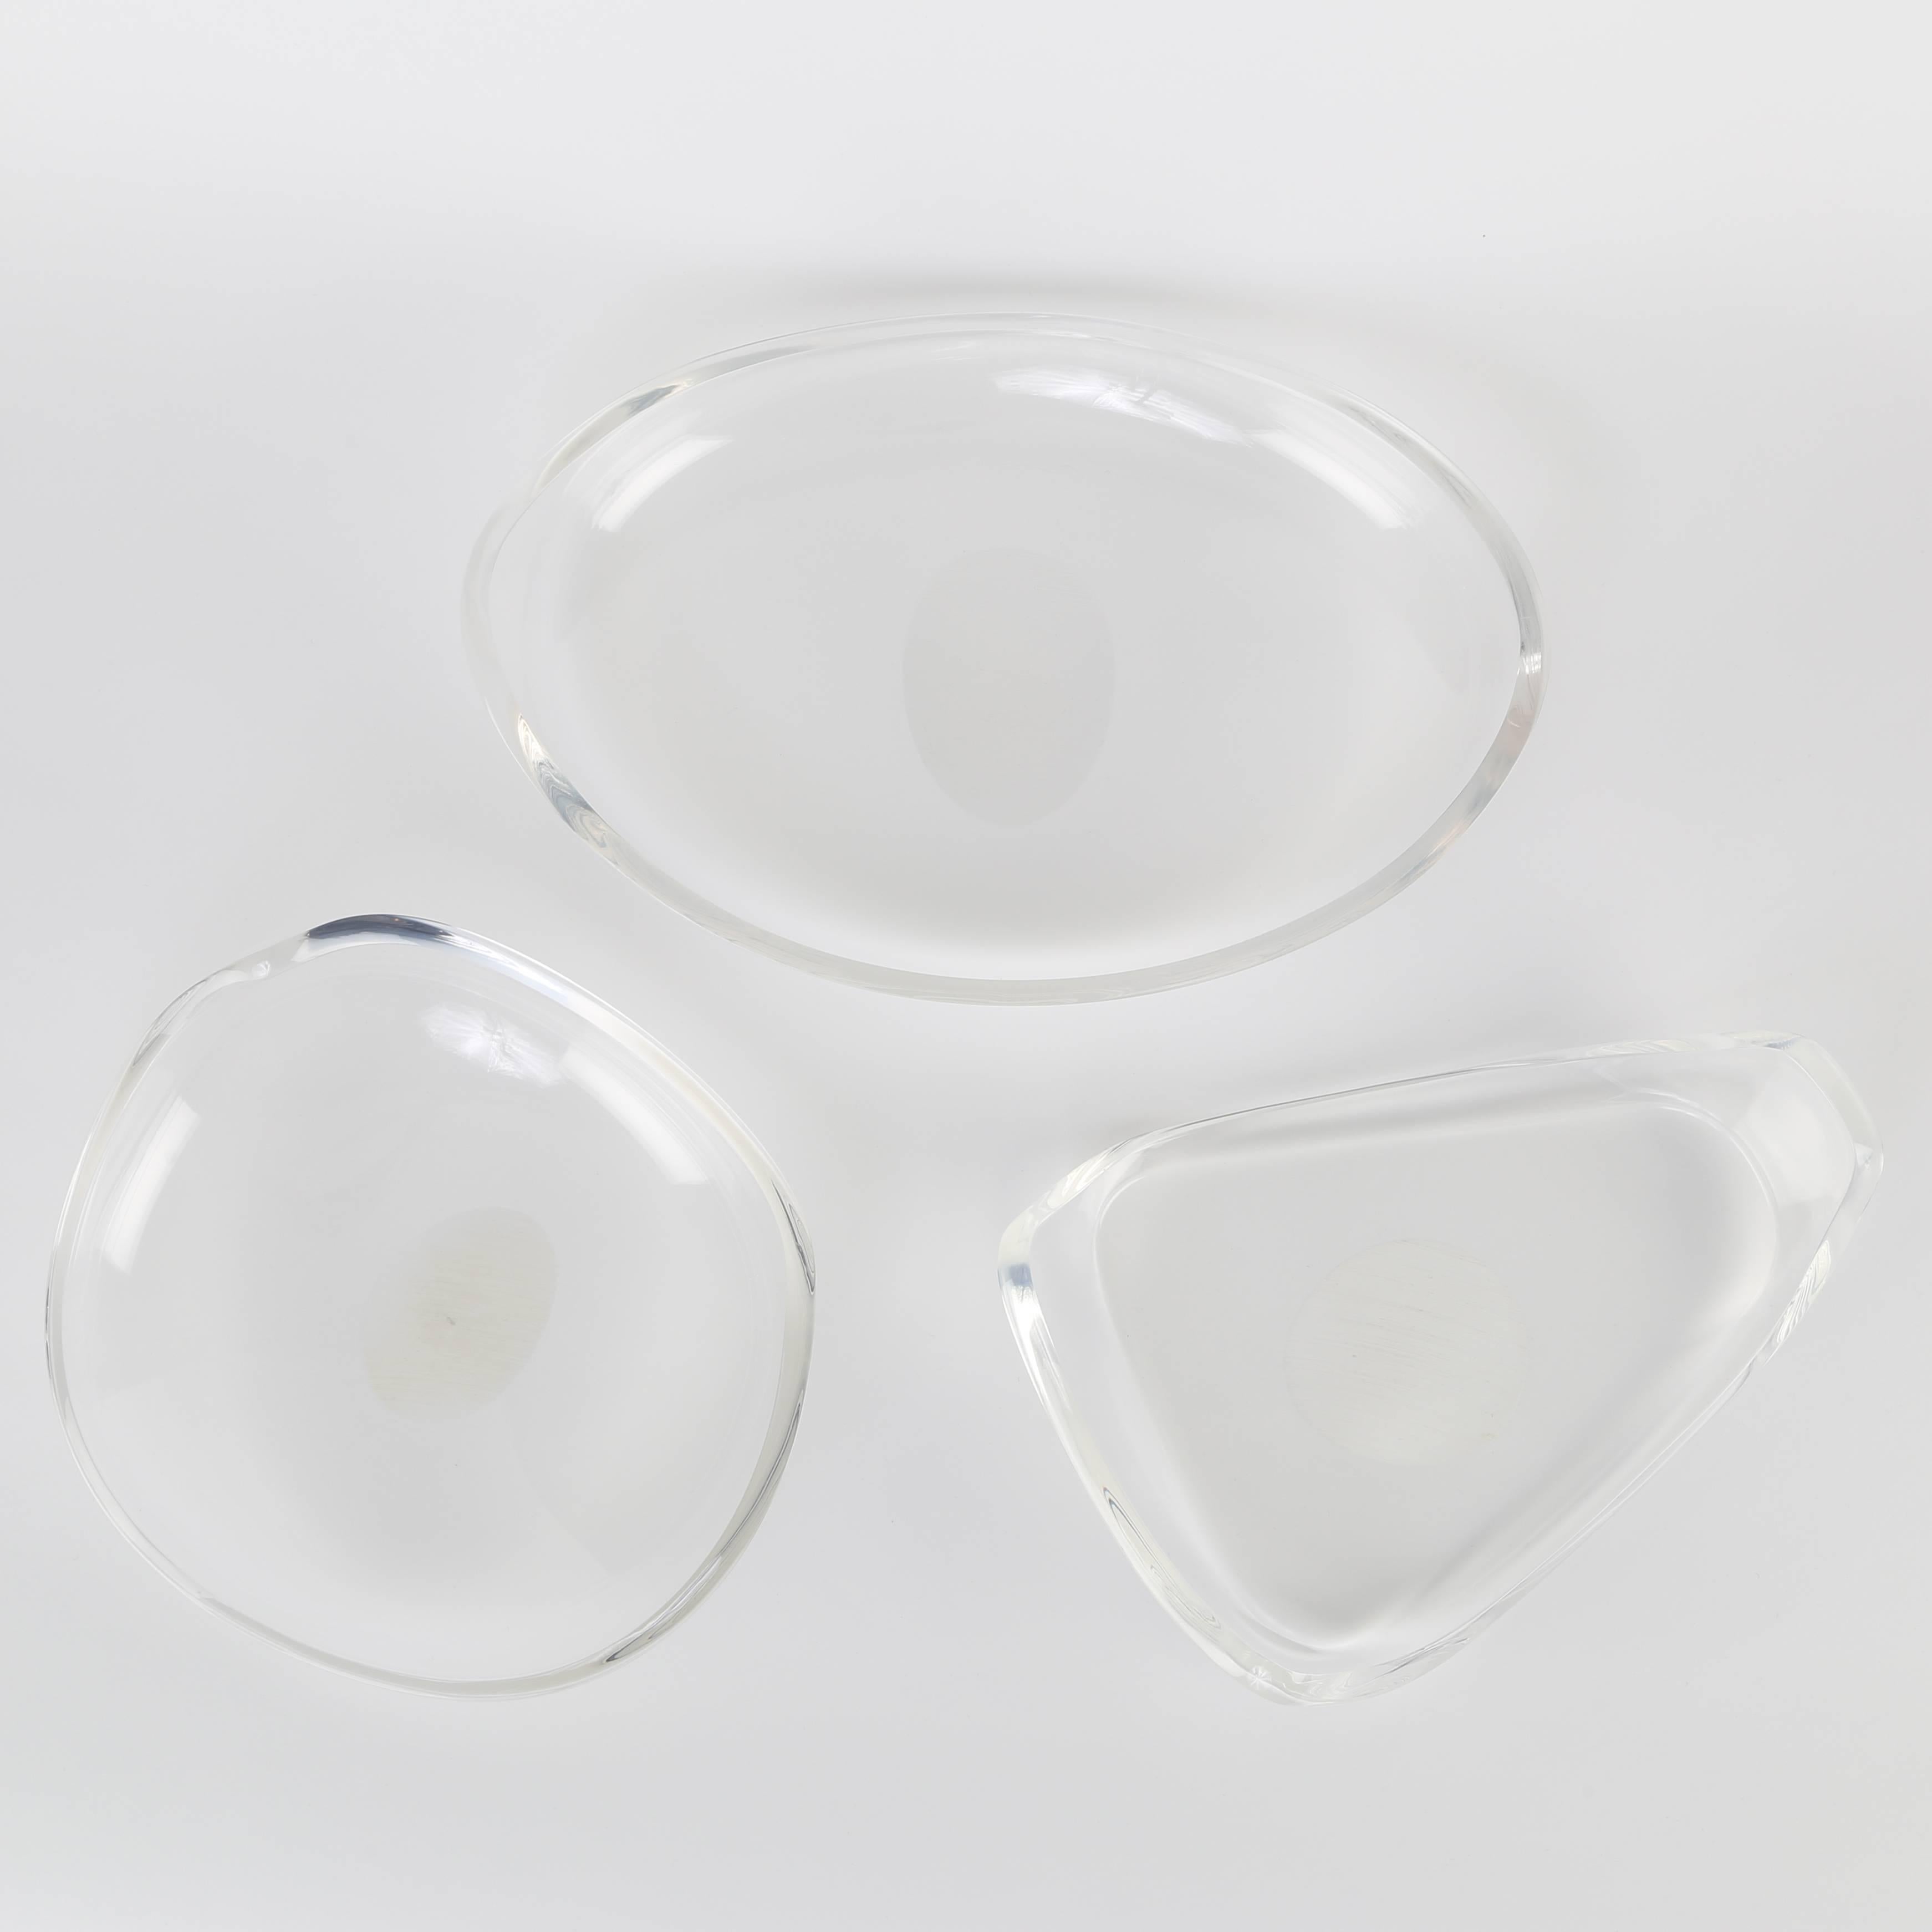 This set of three, free-form sculptural acrylic bowls makes a great tablescape, with light bouncing in all directions. From the Astrolite line by the Ritts Co. of Los Angeles, owned by Herbert and Shirley Ritts, parents of the deceased photographer